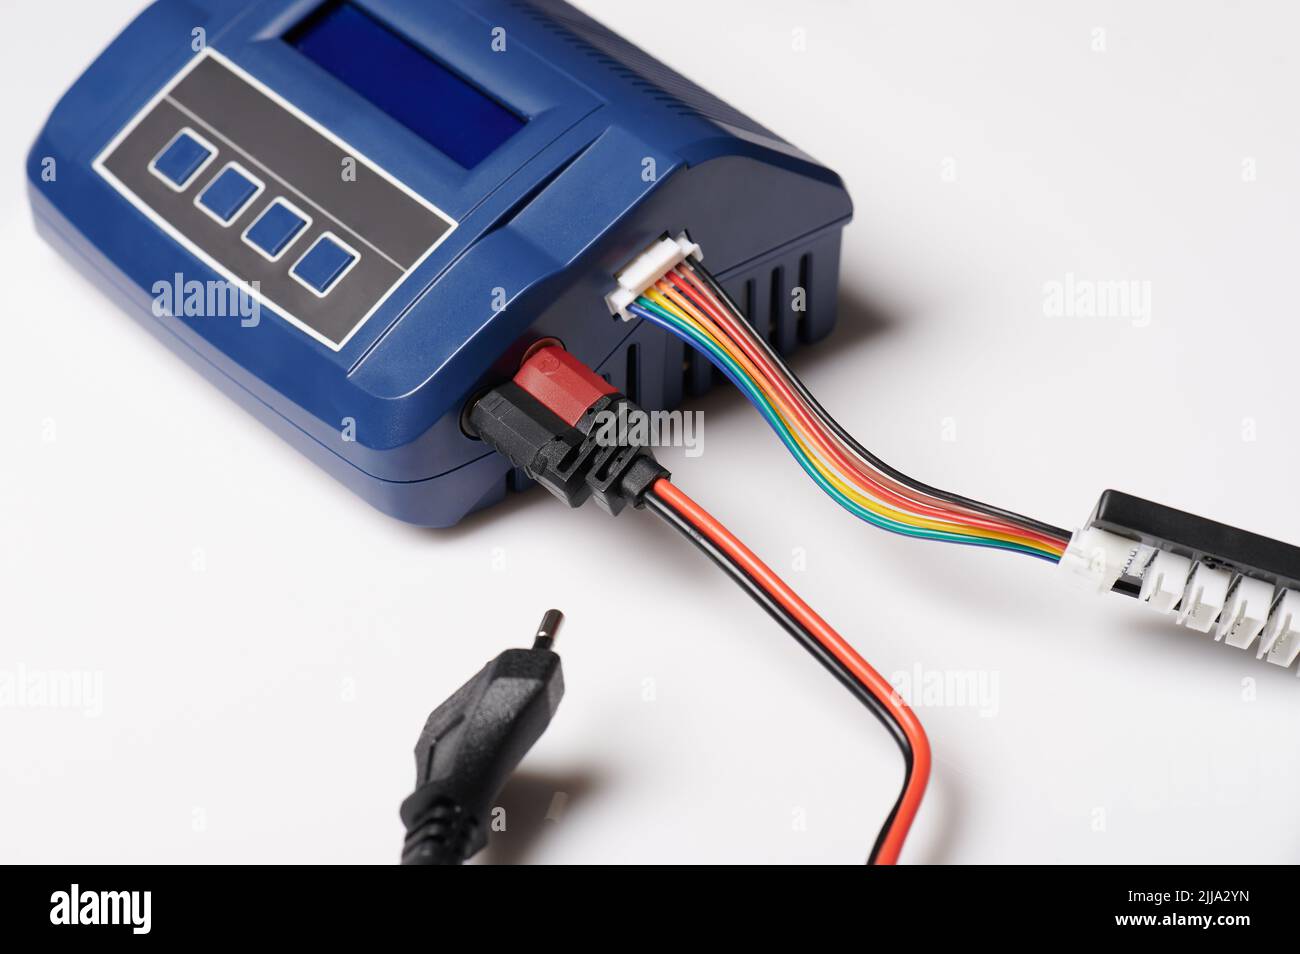 Professional charger with connect cables isolated on studio background Stock Photo